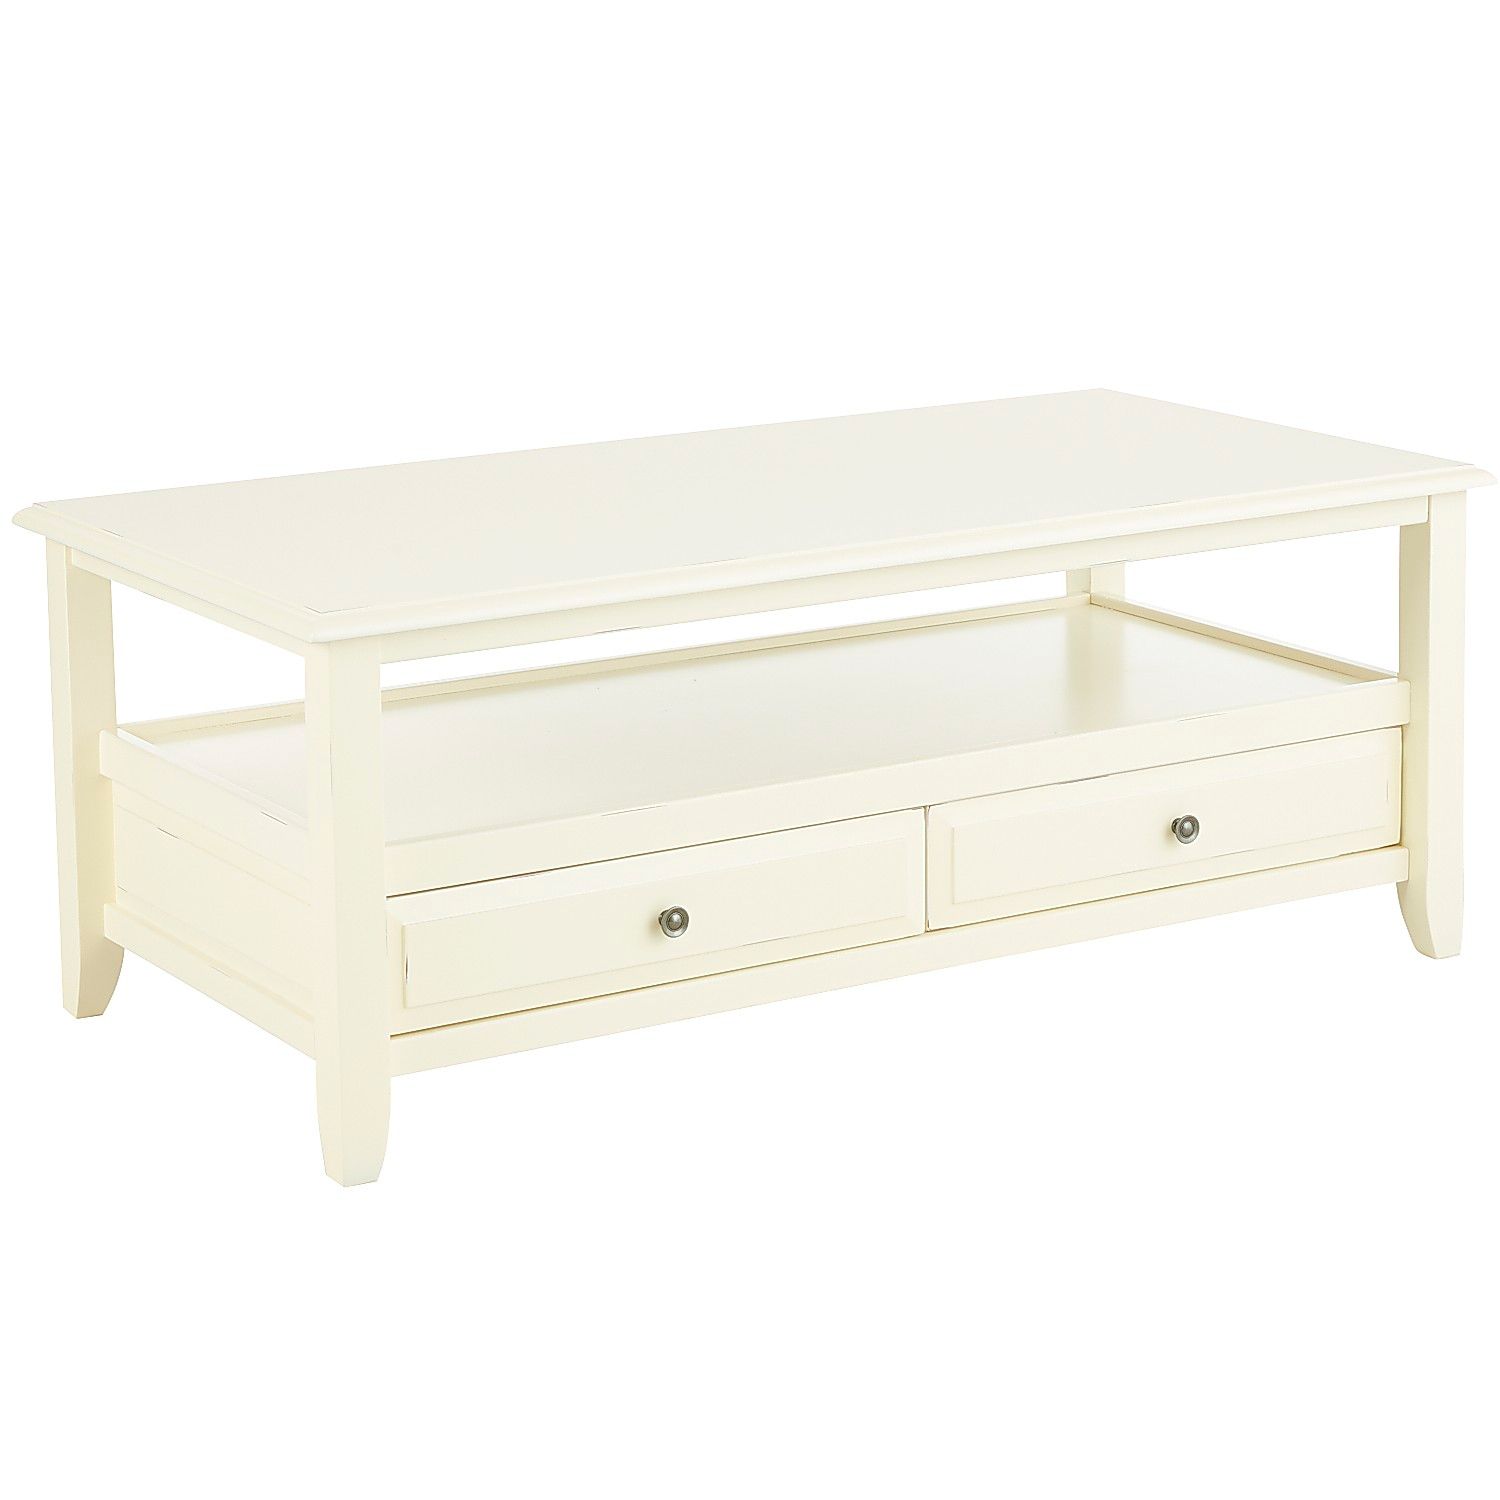 anywhere antique white coffee table with knobs pier imports one accent collection bean shaped mainstays parsons desk drawer lucite ikea hamptons cushions pottery barn benchwright